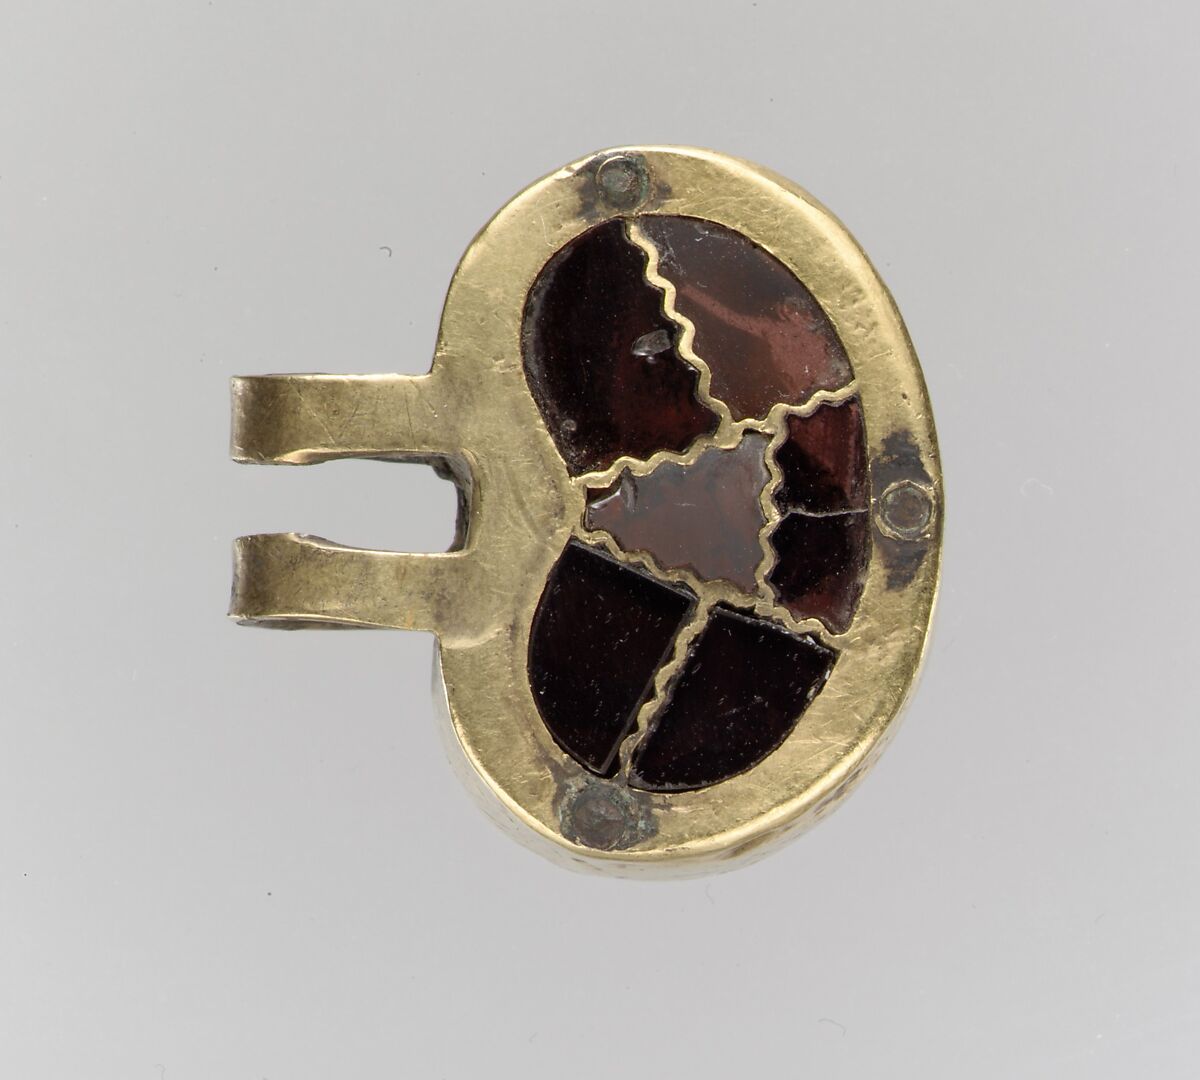 Part of a Shoe Buckle, Gold with garnets, Frankish (?)